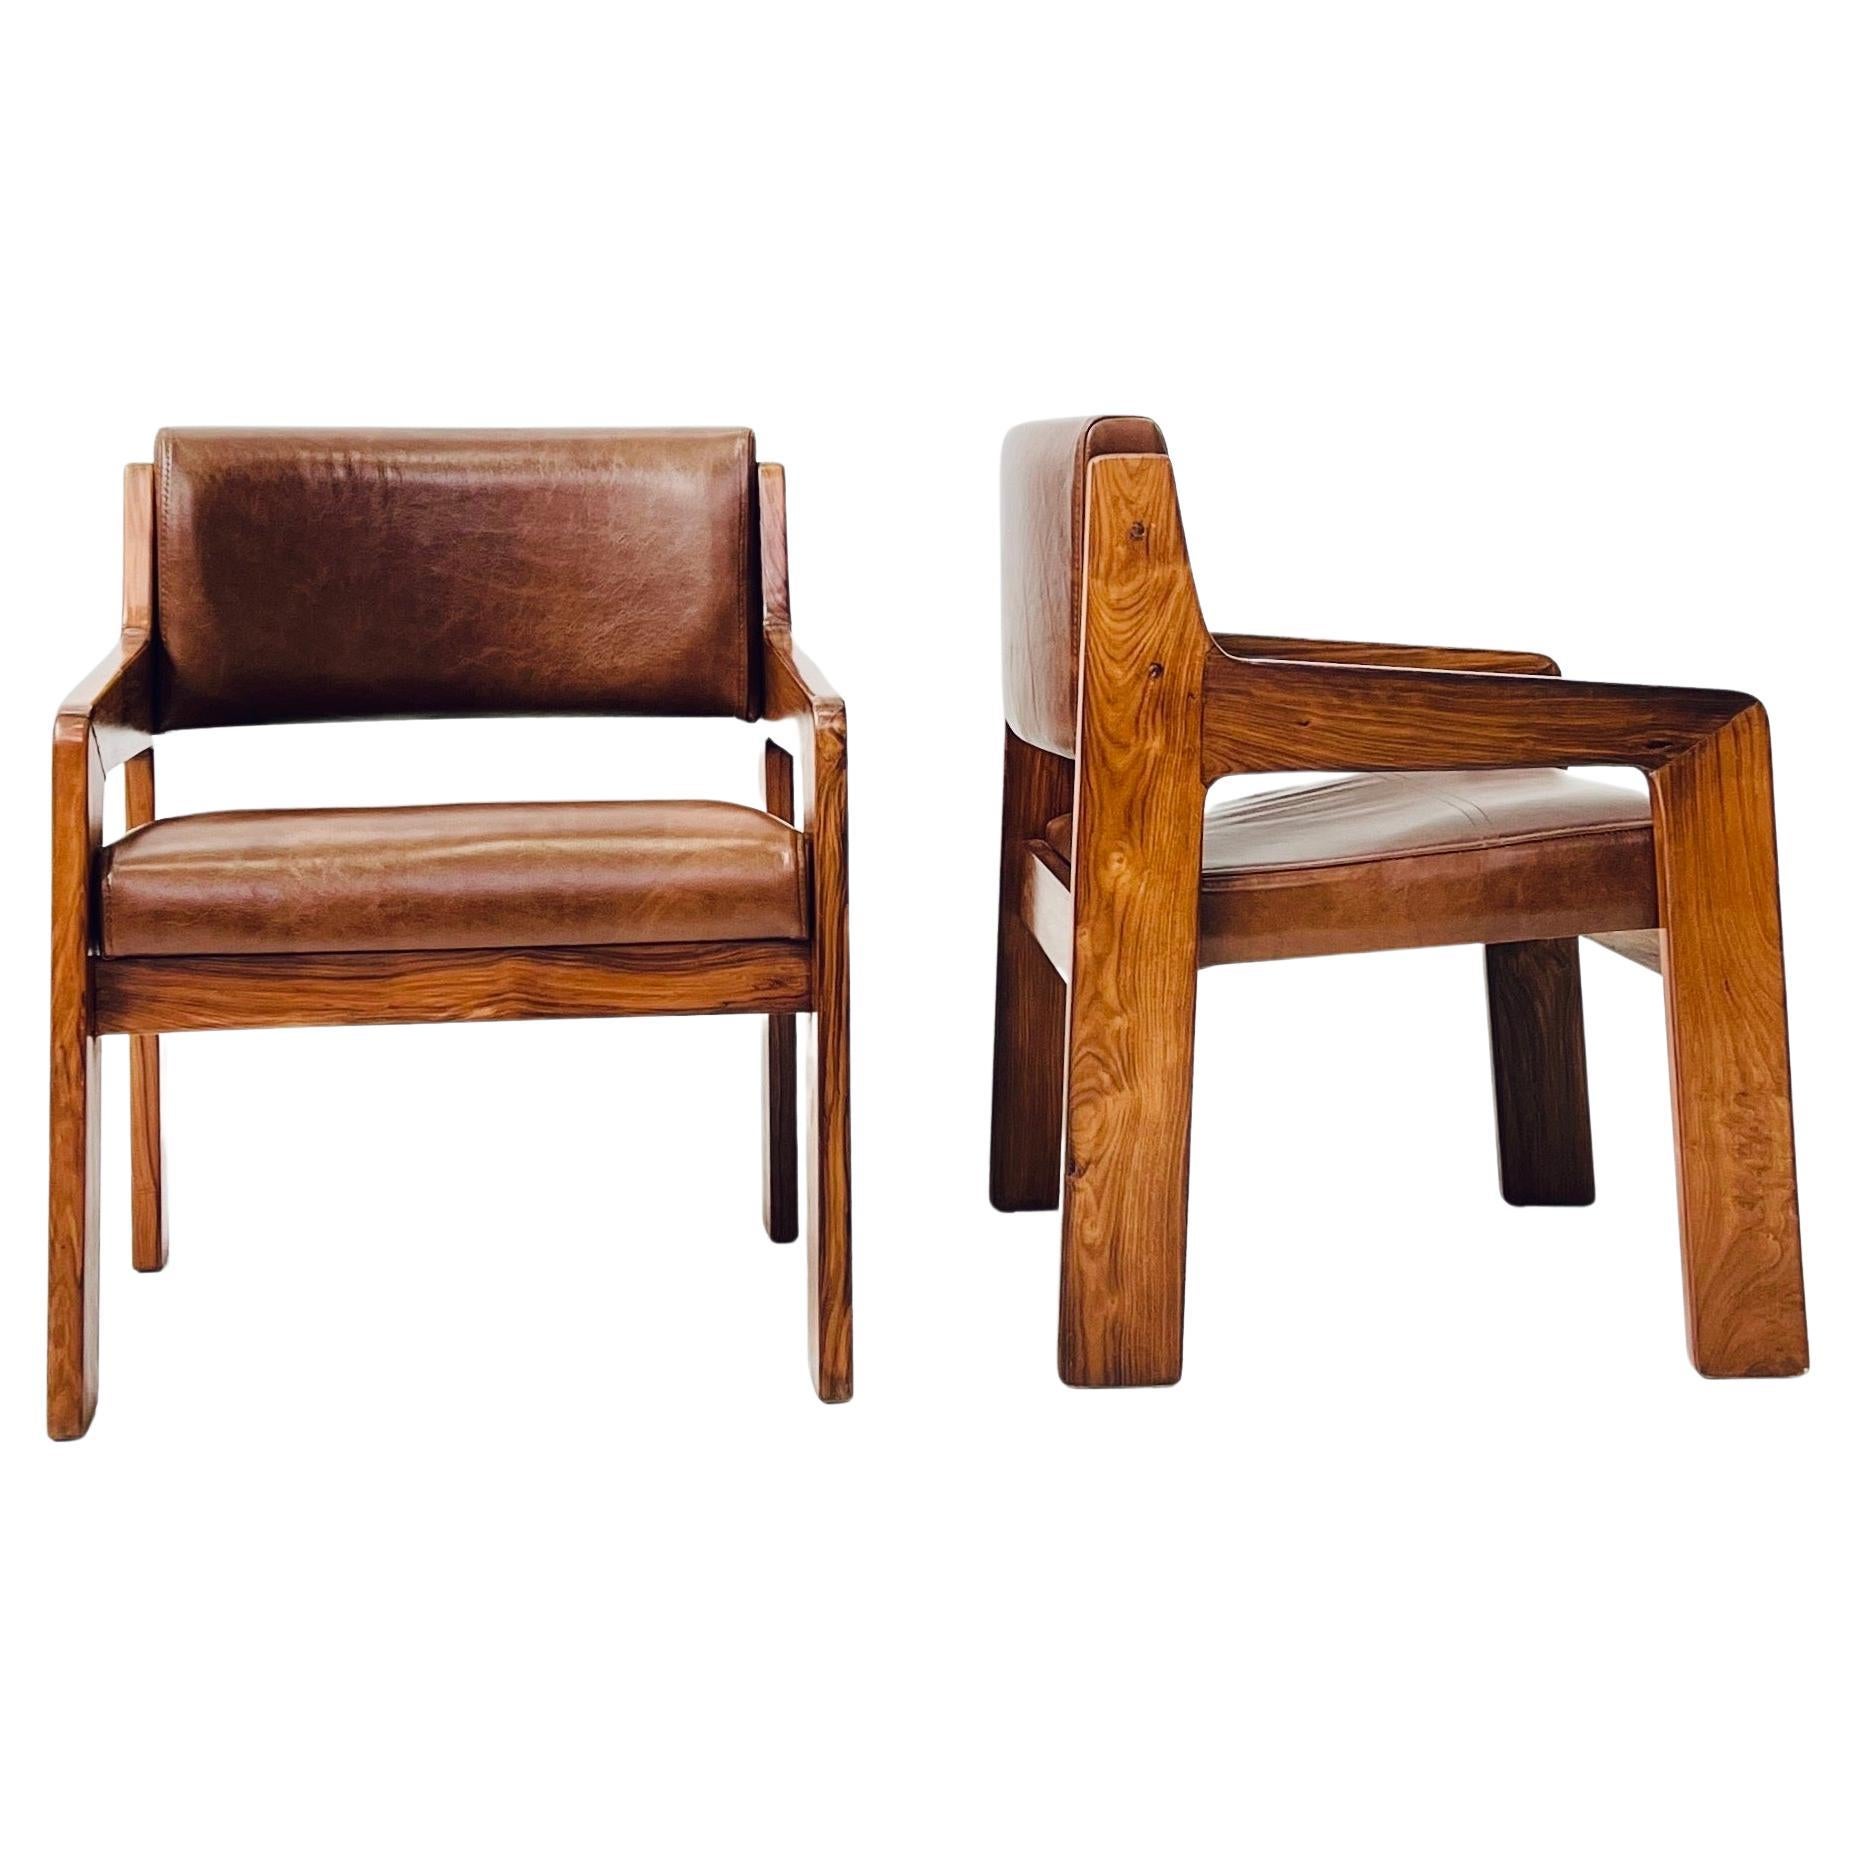 Pair of original armchairs designed by renowned Brazilian designer Jorge Zalszupin in Caviúna wood and natural leather seats. This pair made up the decoration of the 'Hotel Nacional do Rio de Janeiro', a project by architect Oscar Niemeyer in the